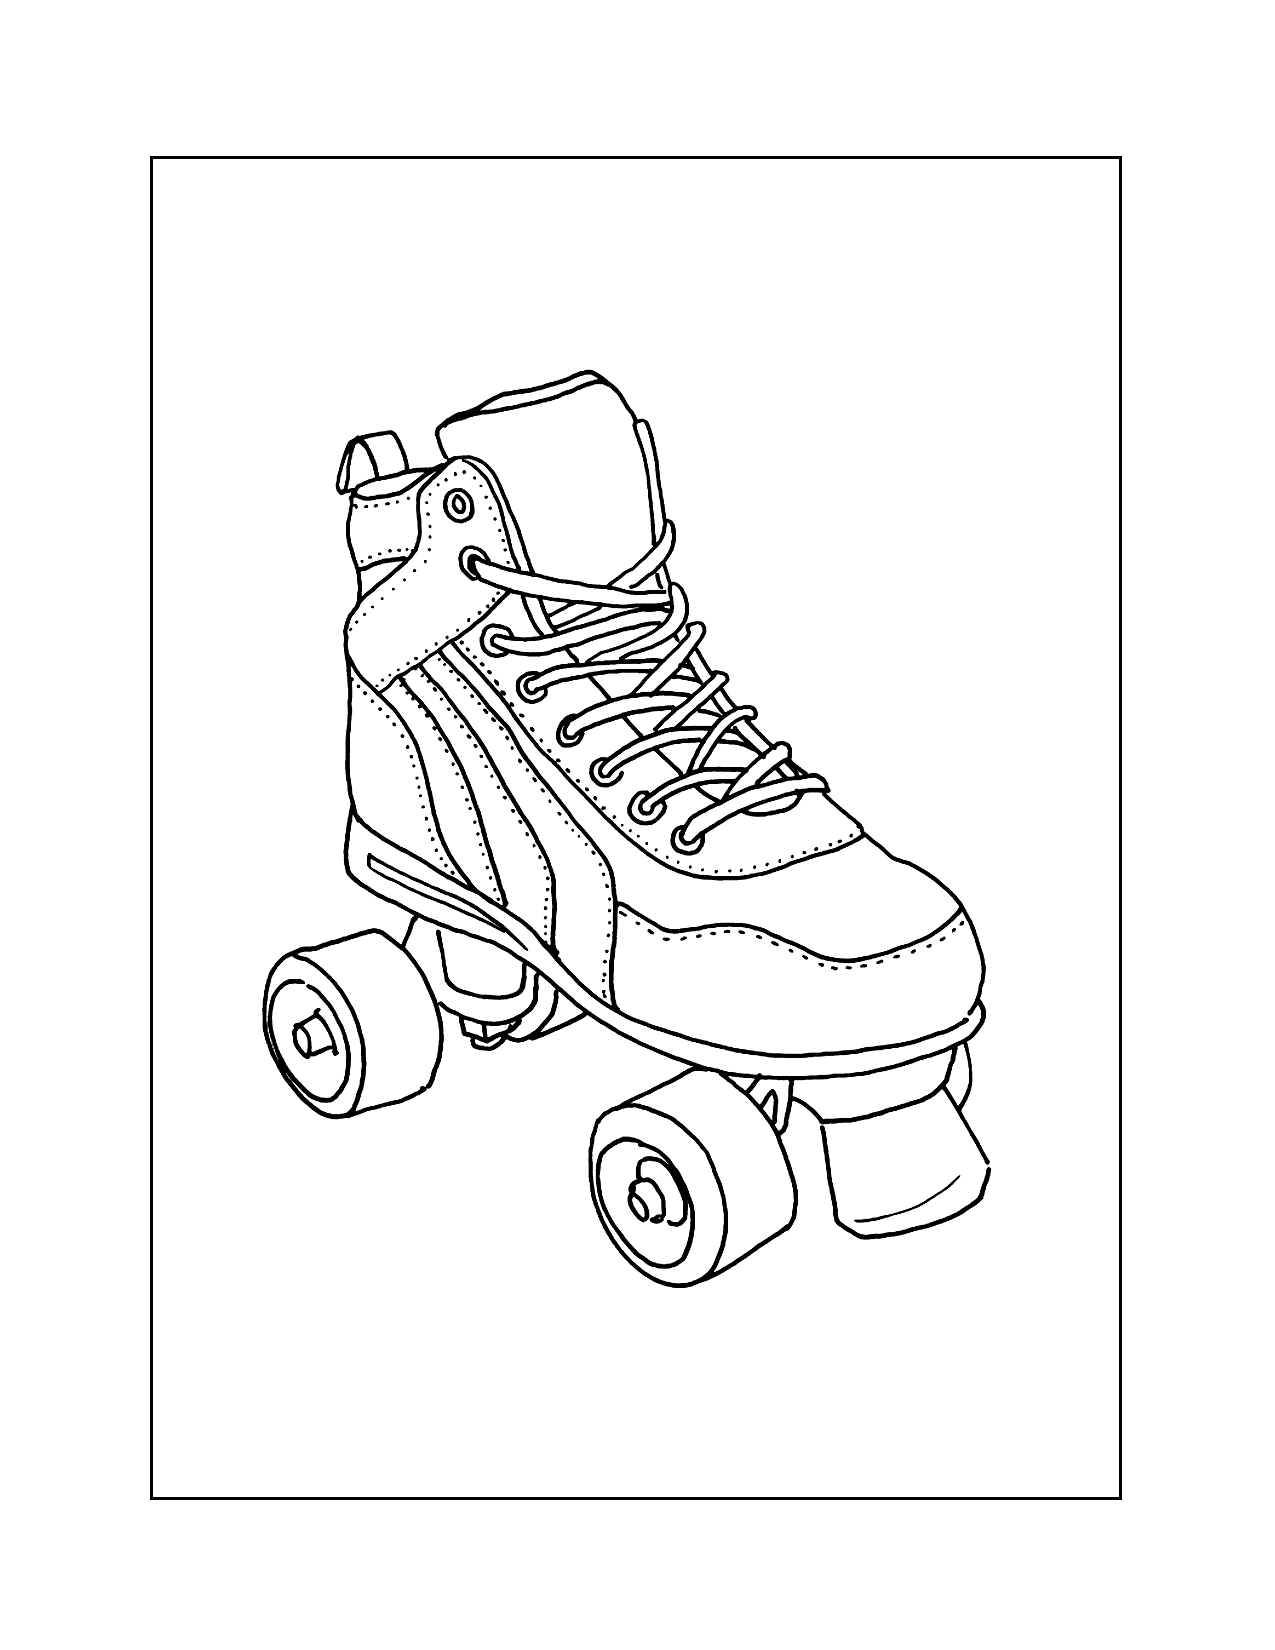 Roller Skate With Rubber Stopper Coloring Page